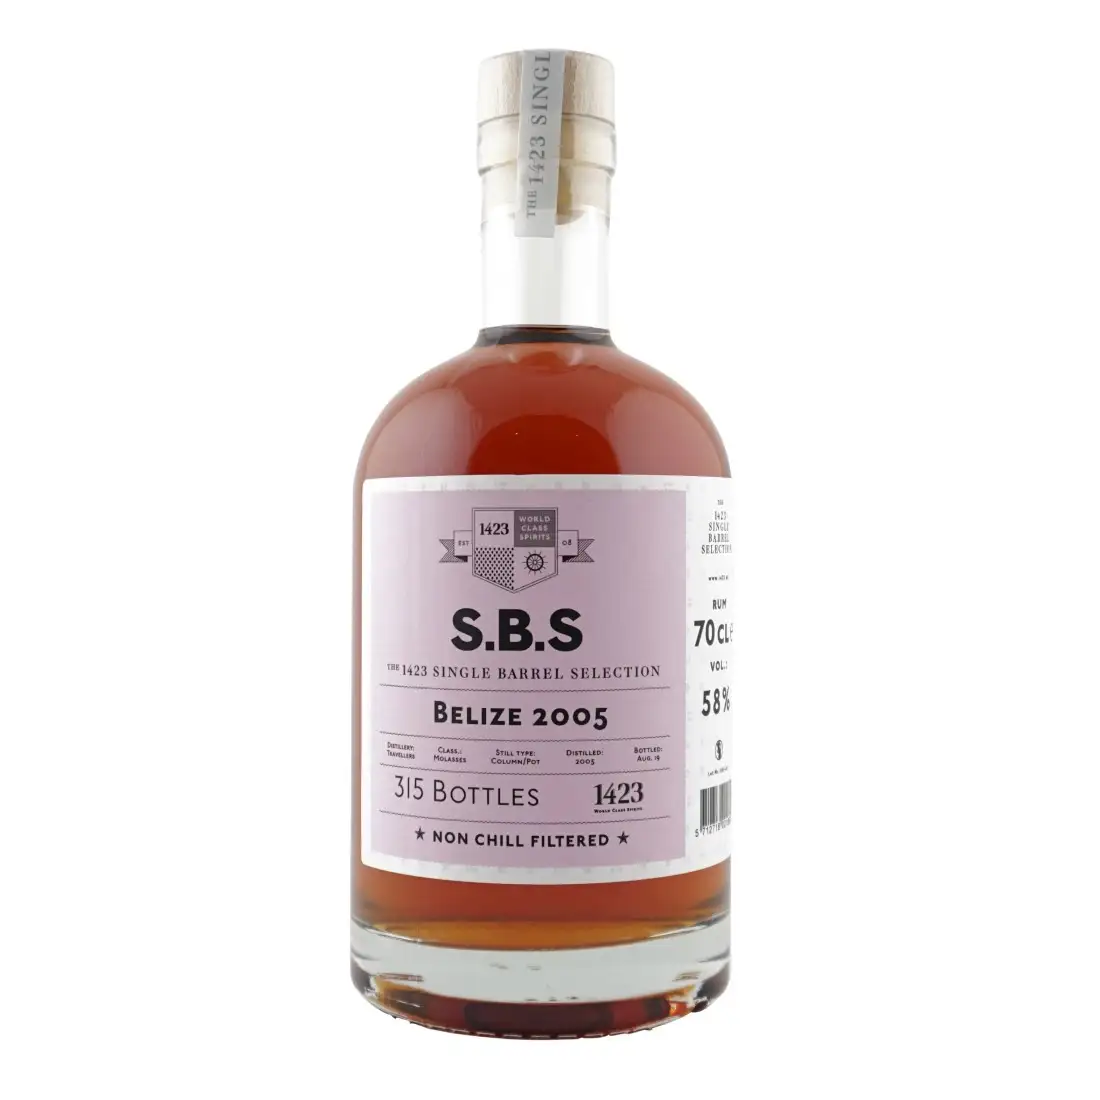 Image of the front of the bottle of the rum S.B.S Belize